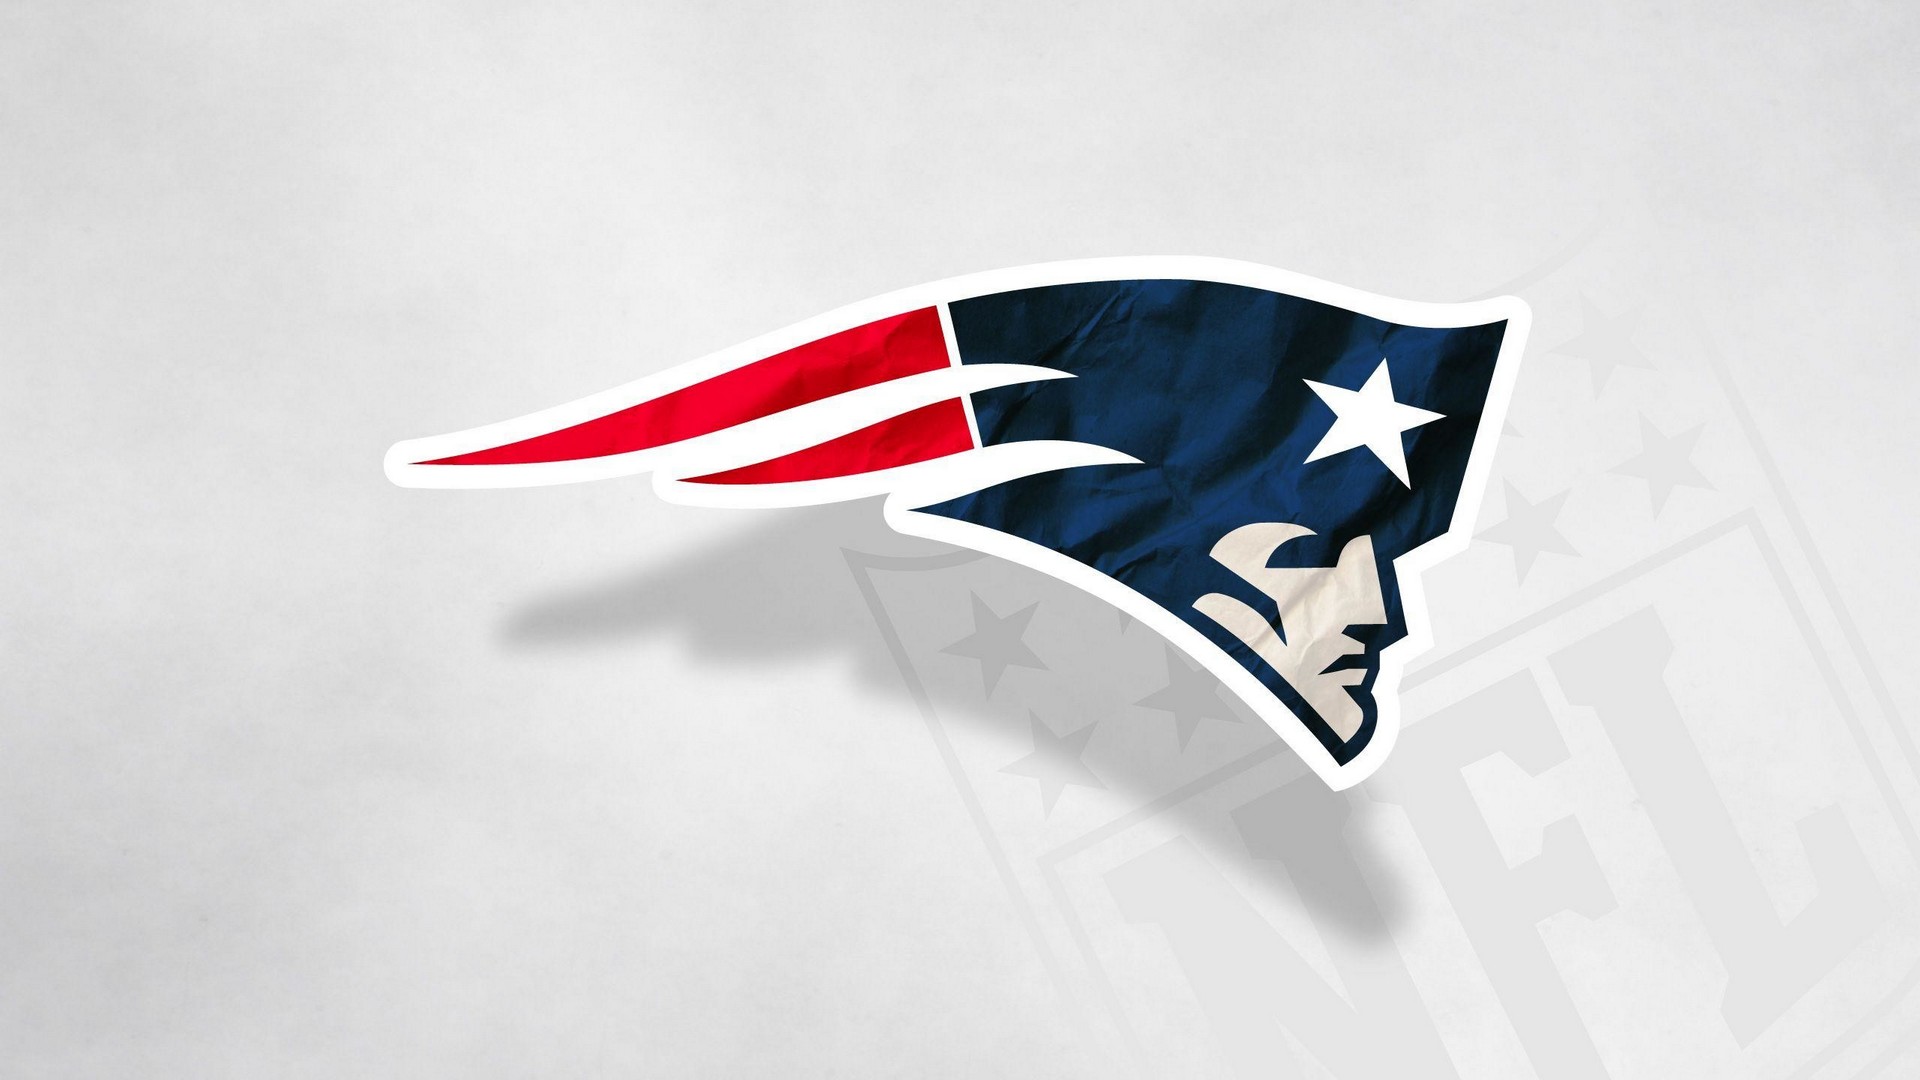 Desktop Wallpapers New England Patriots With high-resolution 1920X1080 pixel. Download and set as wallpaper for Desktop Computer, Apple iPhone X, XS Max, XR, 8, 7, 6, SE, iPad, Android